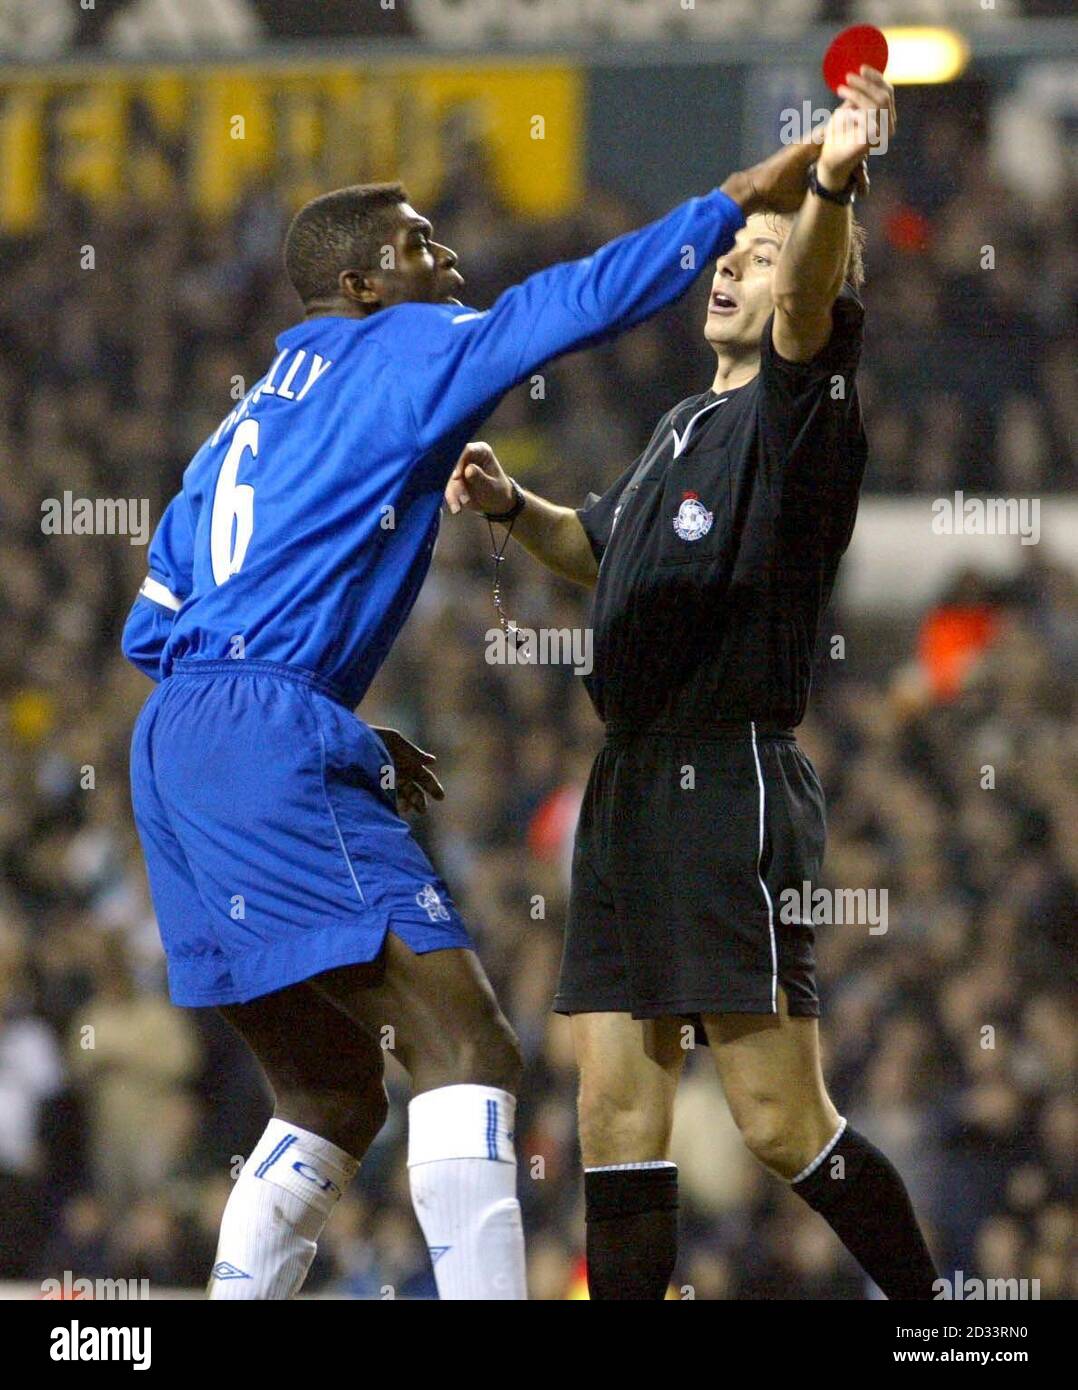 Chelsea's skipper Marcel Desailly tries to stop match referee Mark Halsey raiseing the red card to dismiss Jimmy Floyd Hasselbaink. After 55 minutes, Hasselbaink fouled Sullivan and that sparked a melee inside the Spurs box.   *  Referee Mark Halsey brandished the red card at the big striker for pushing Sheringham in the face  but he got the wrong Dutchman as Mario Melchiot was the real offender. during their Worthington Cup semi-final, 2nd leg match Spurs at Tottenham's, White Hart Lane ground.  THIS PICTURE CAN ONLY BE USED WITHIN THE CONTEXT OF AN EDITORIAL FEATURE. NO WEBSITE/INTERNET USE  Stock Photo